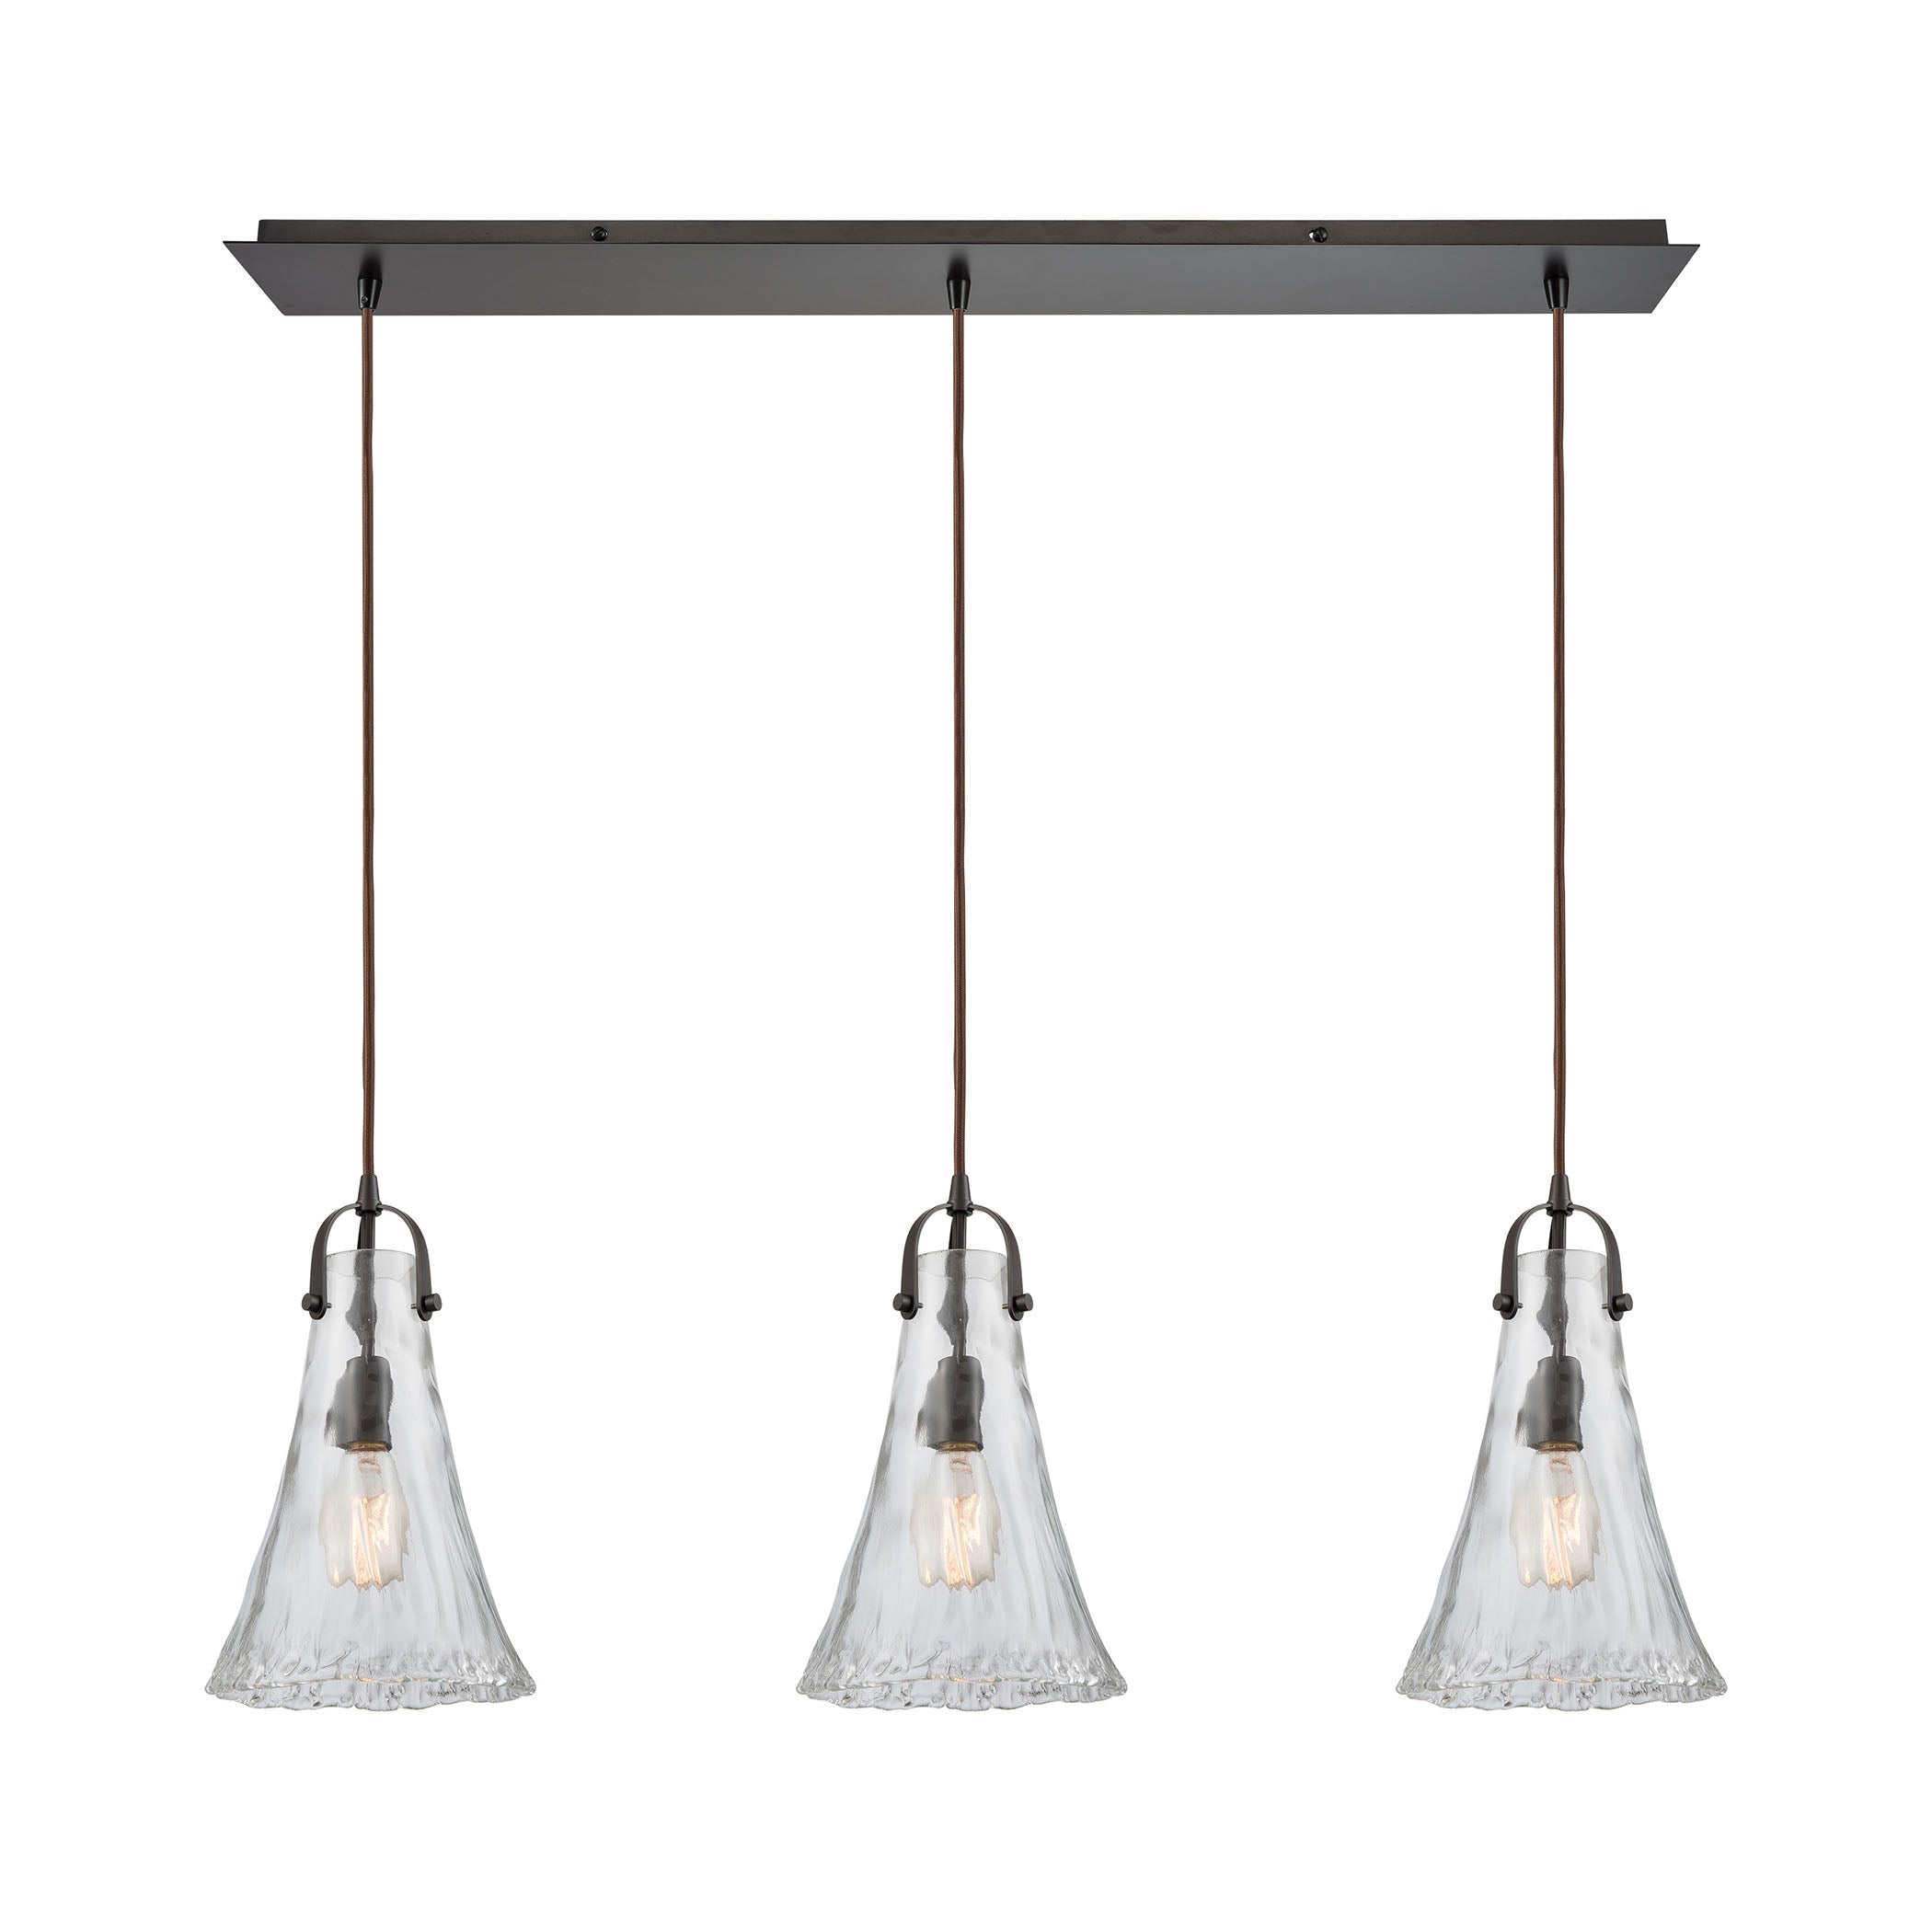 ELK Lighting 10555/3LP Hand Formed Glass 3-Light Linear Mini Pendant Fixture in Oiled Bronze with Clear Hand-formed Glass